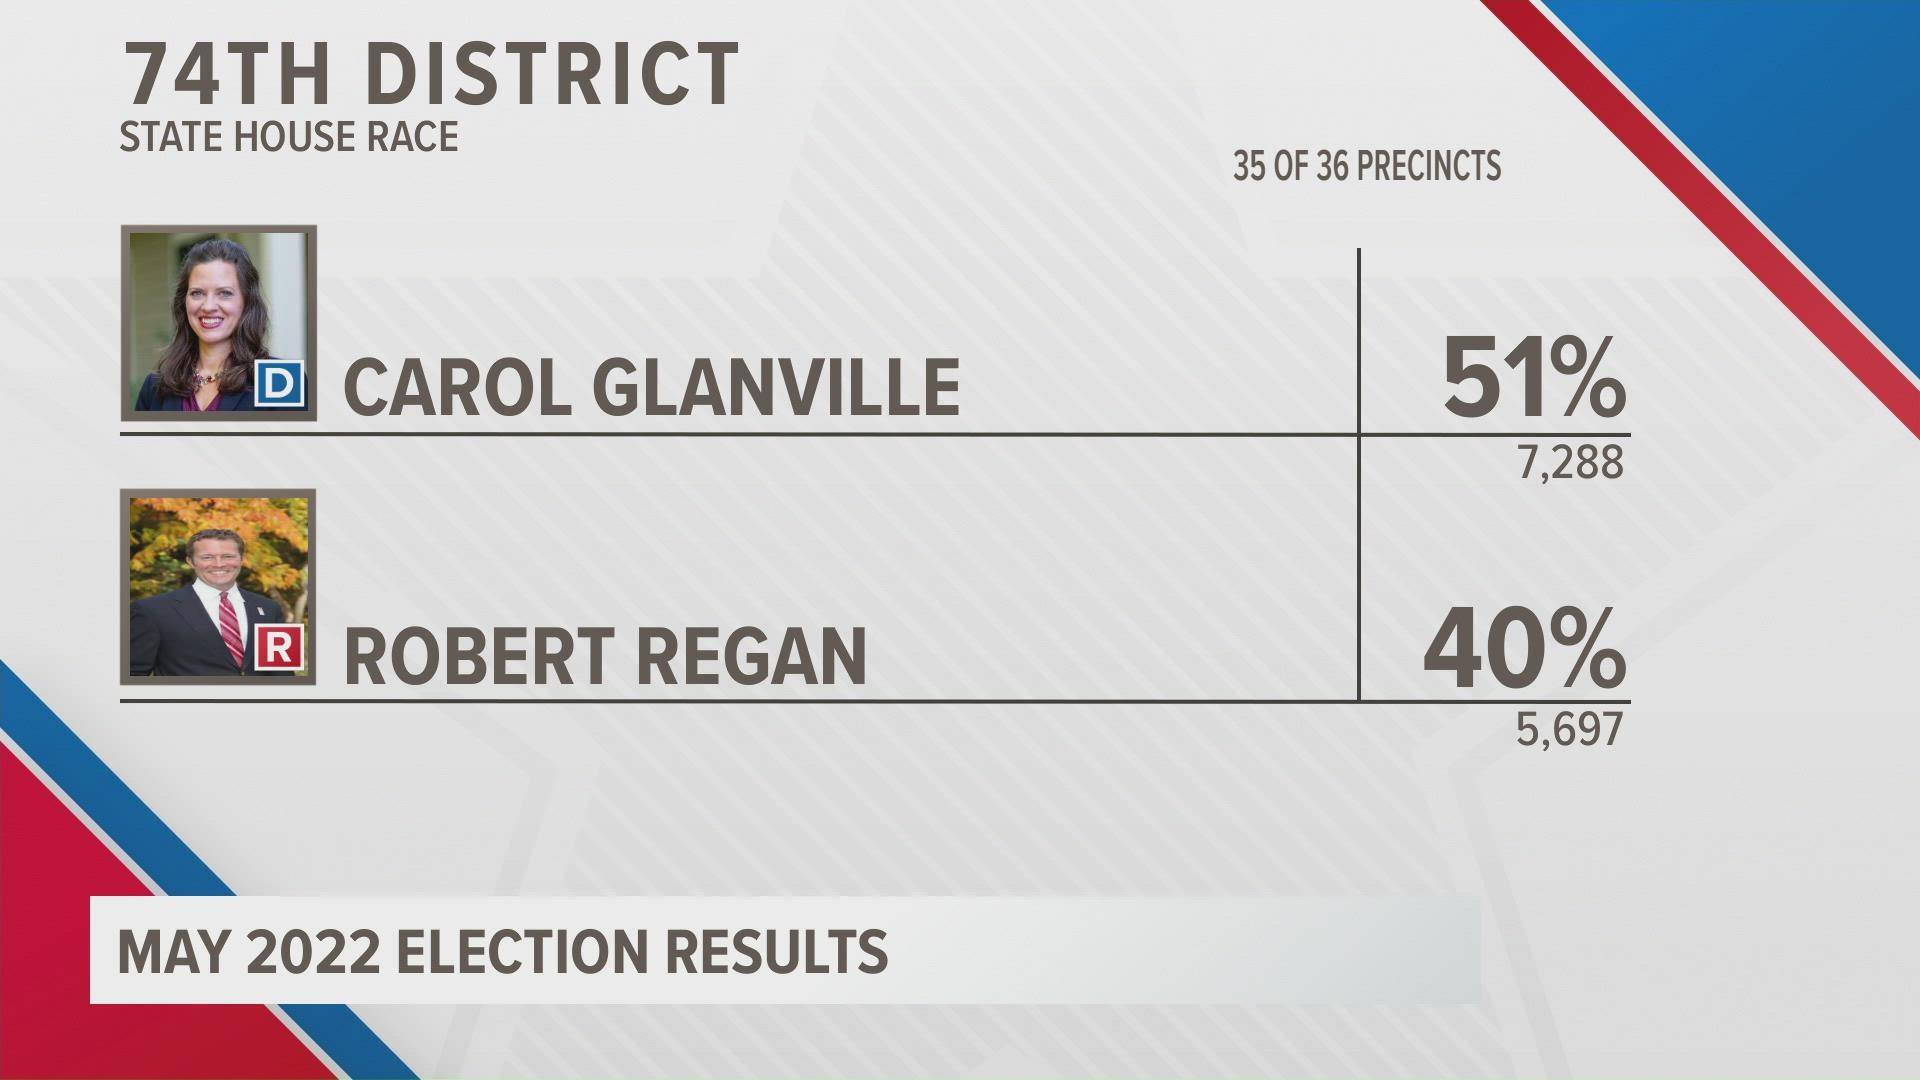 In a historic win, Carol Glanville, a Democrat, defeated Republican Robert Regan Tuesday night for the vacant 74th Michigan House District seat.